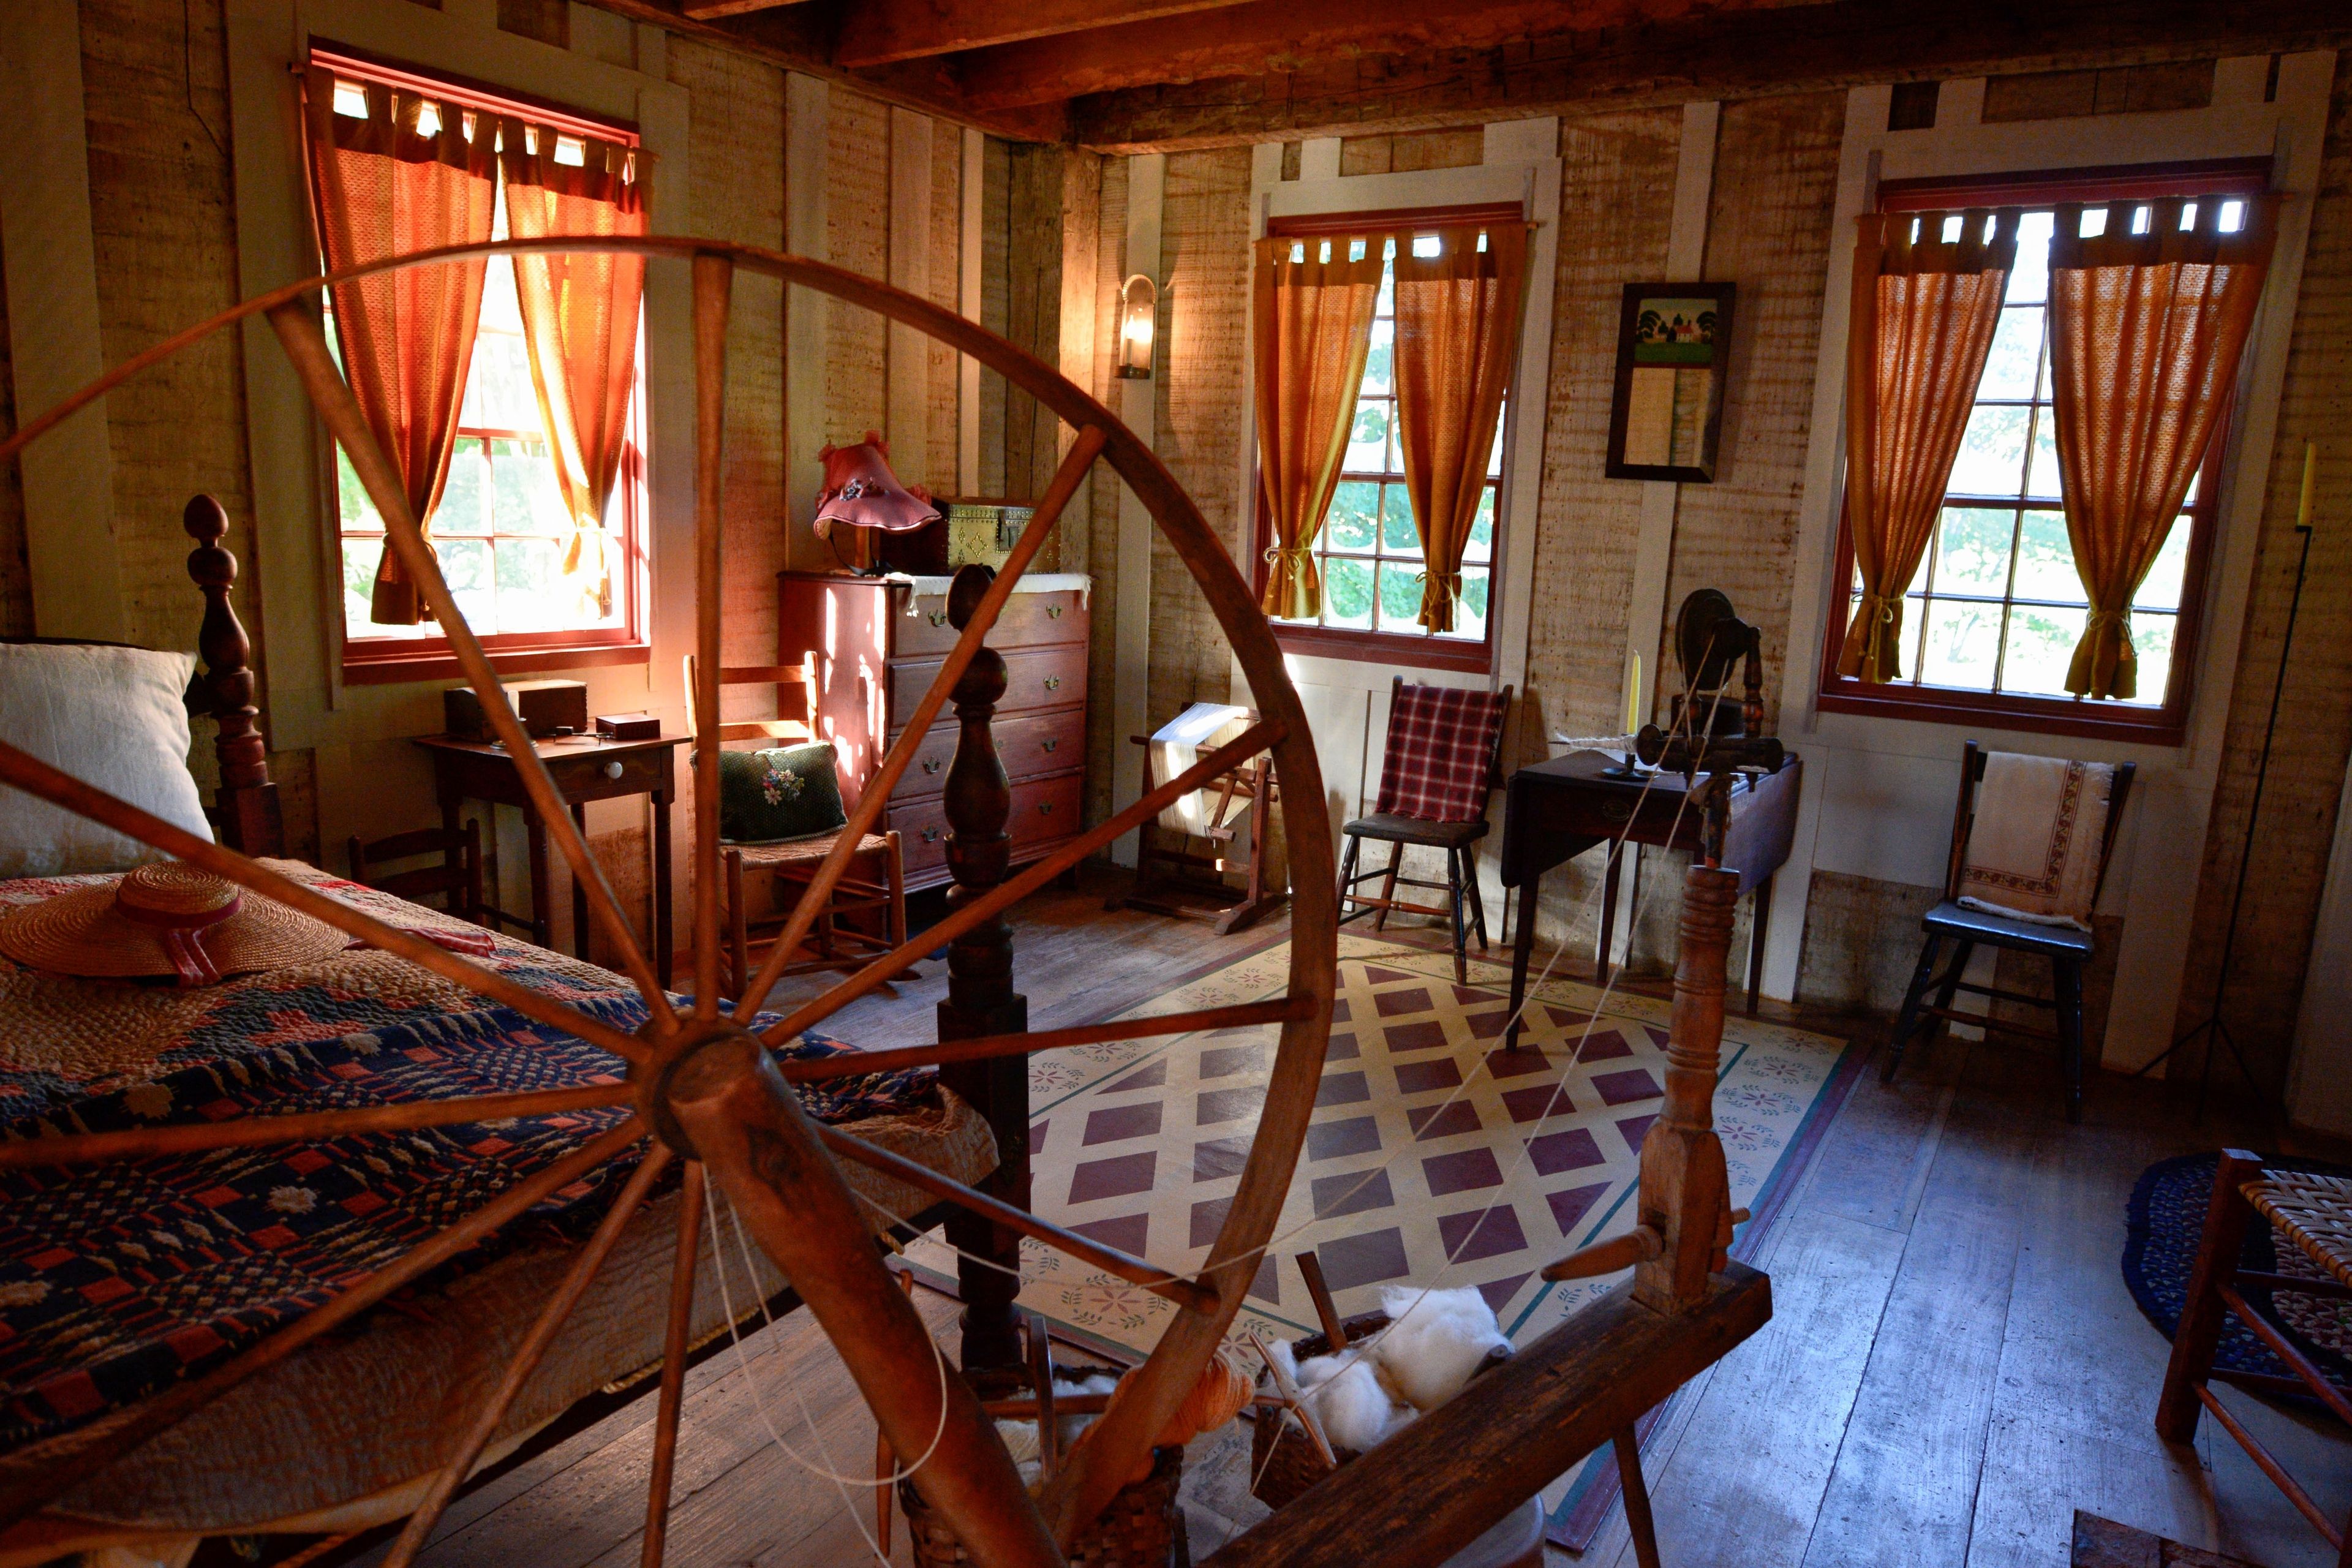 A view inside the house on the Smith family farm in Palmyra, New York.